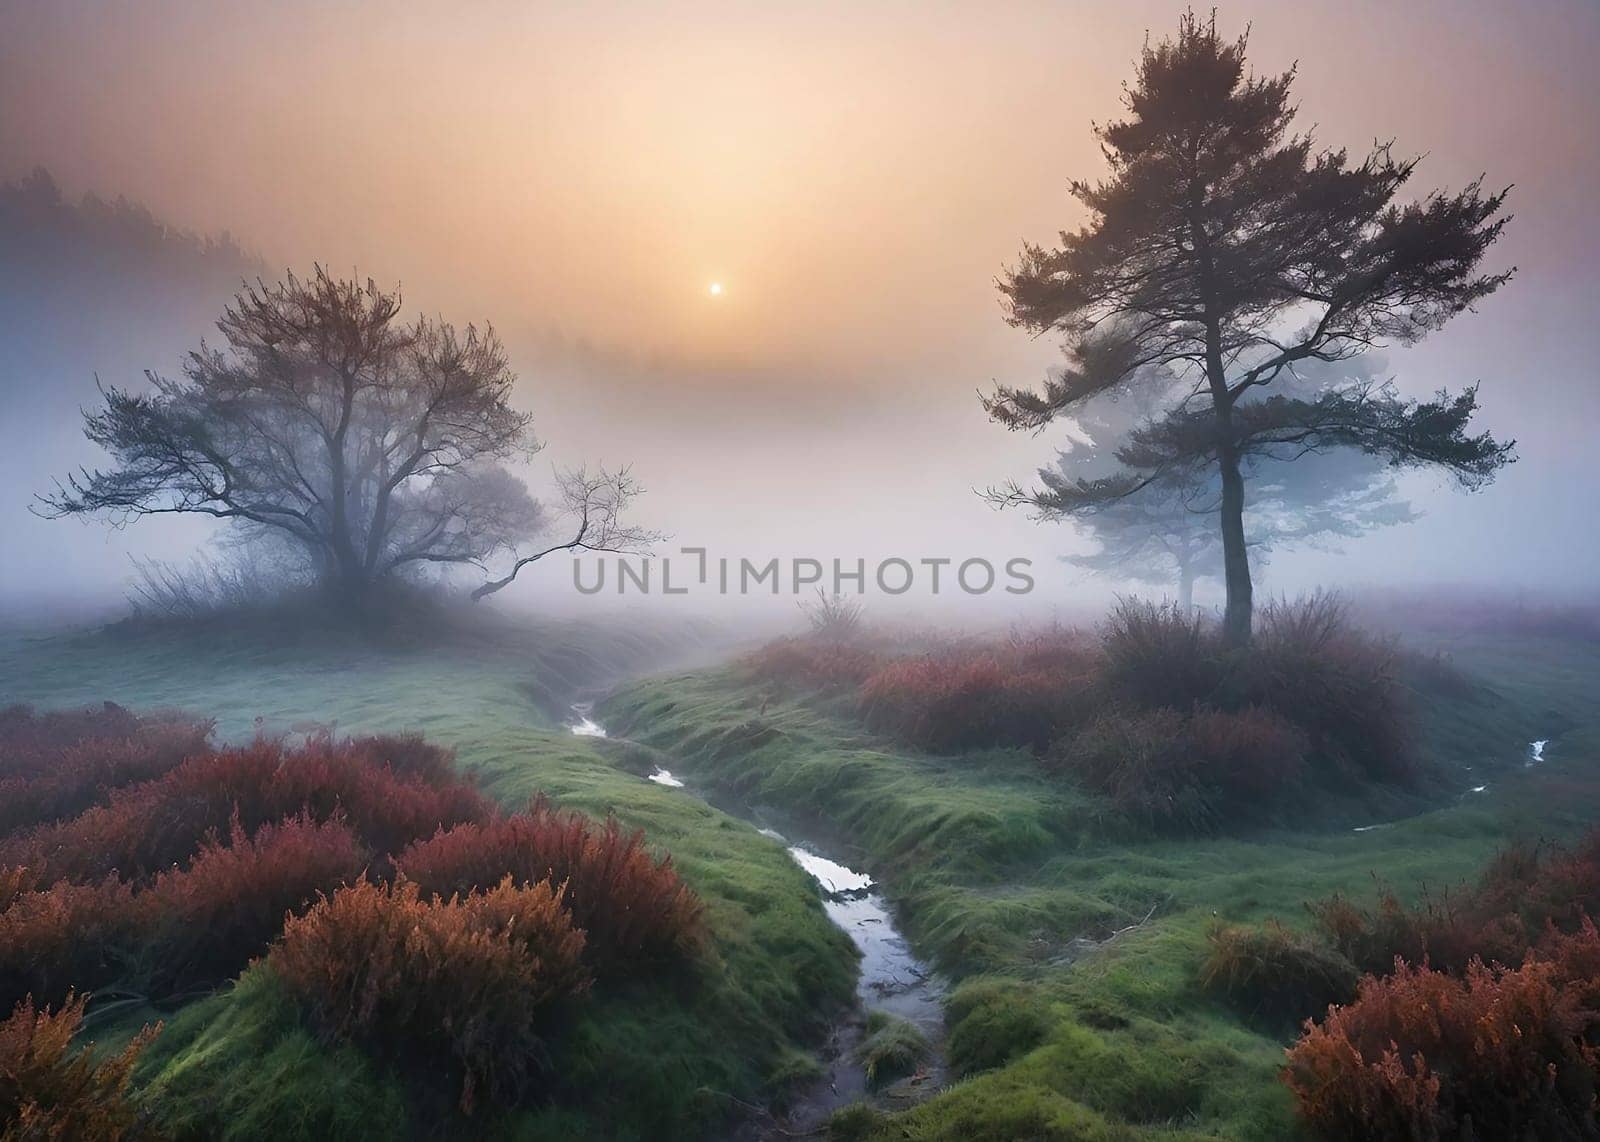 Beautiful landscape image of a misty sunrise over a tree in the countryside.Sunrise in a misty forest in the autumn.Foggy misty forest in the morning.A misty sunrise over a stream flowing through a forest in autumn.